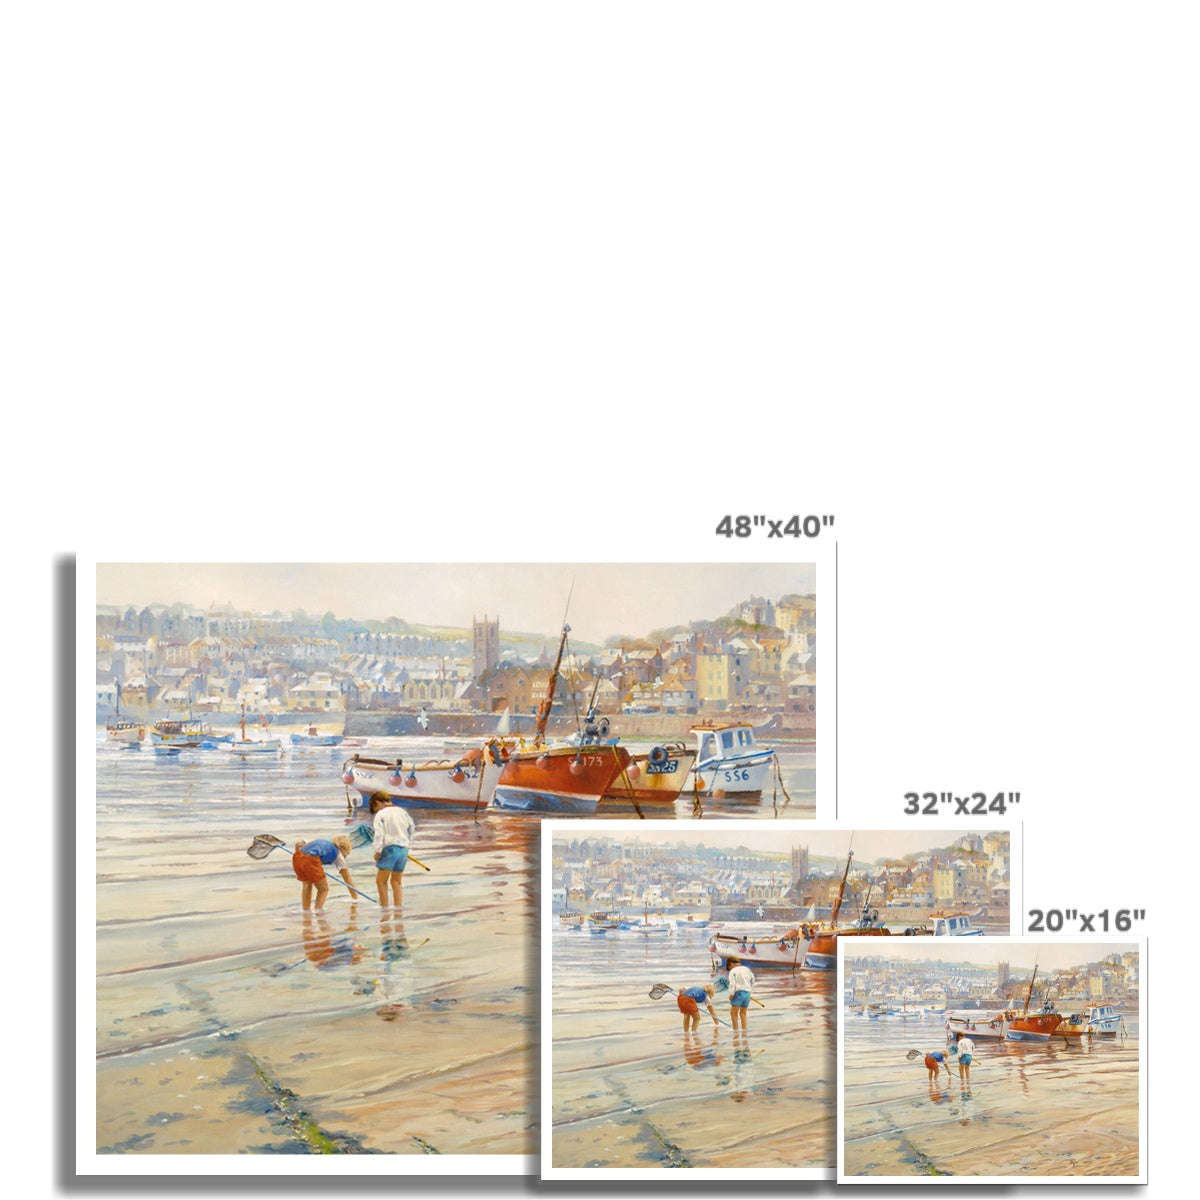 Ted Dyer Fine Art Print. Open Edition Cornish Art Print. &#39;Calm Waters, St Ives Harbour, Cornwall&#39;. Cornwall Art Gallery